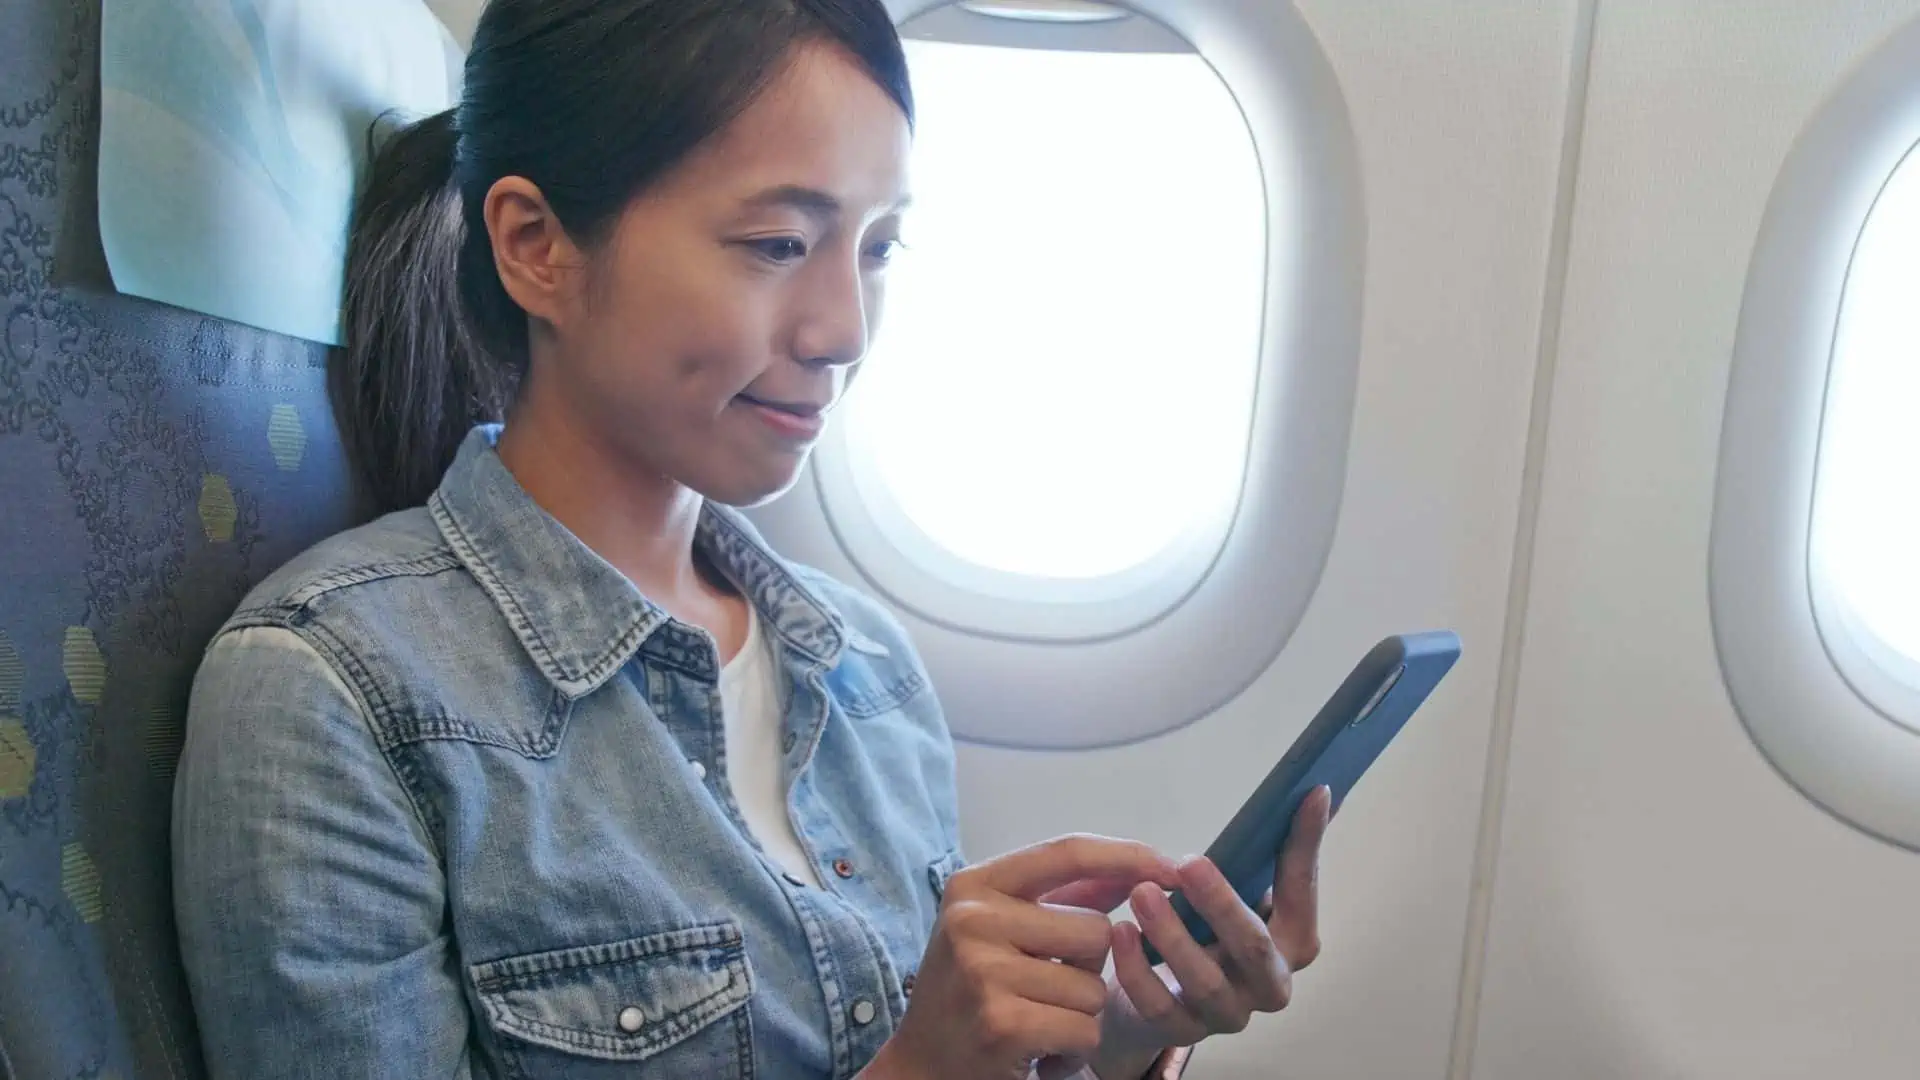 Can You Use a Cellphone on a Plane?